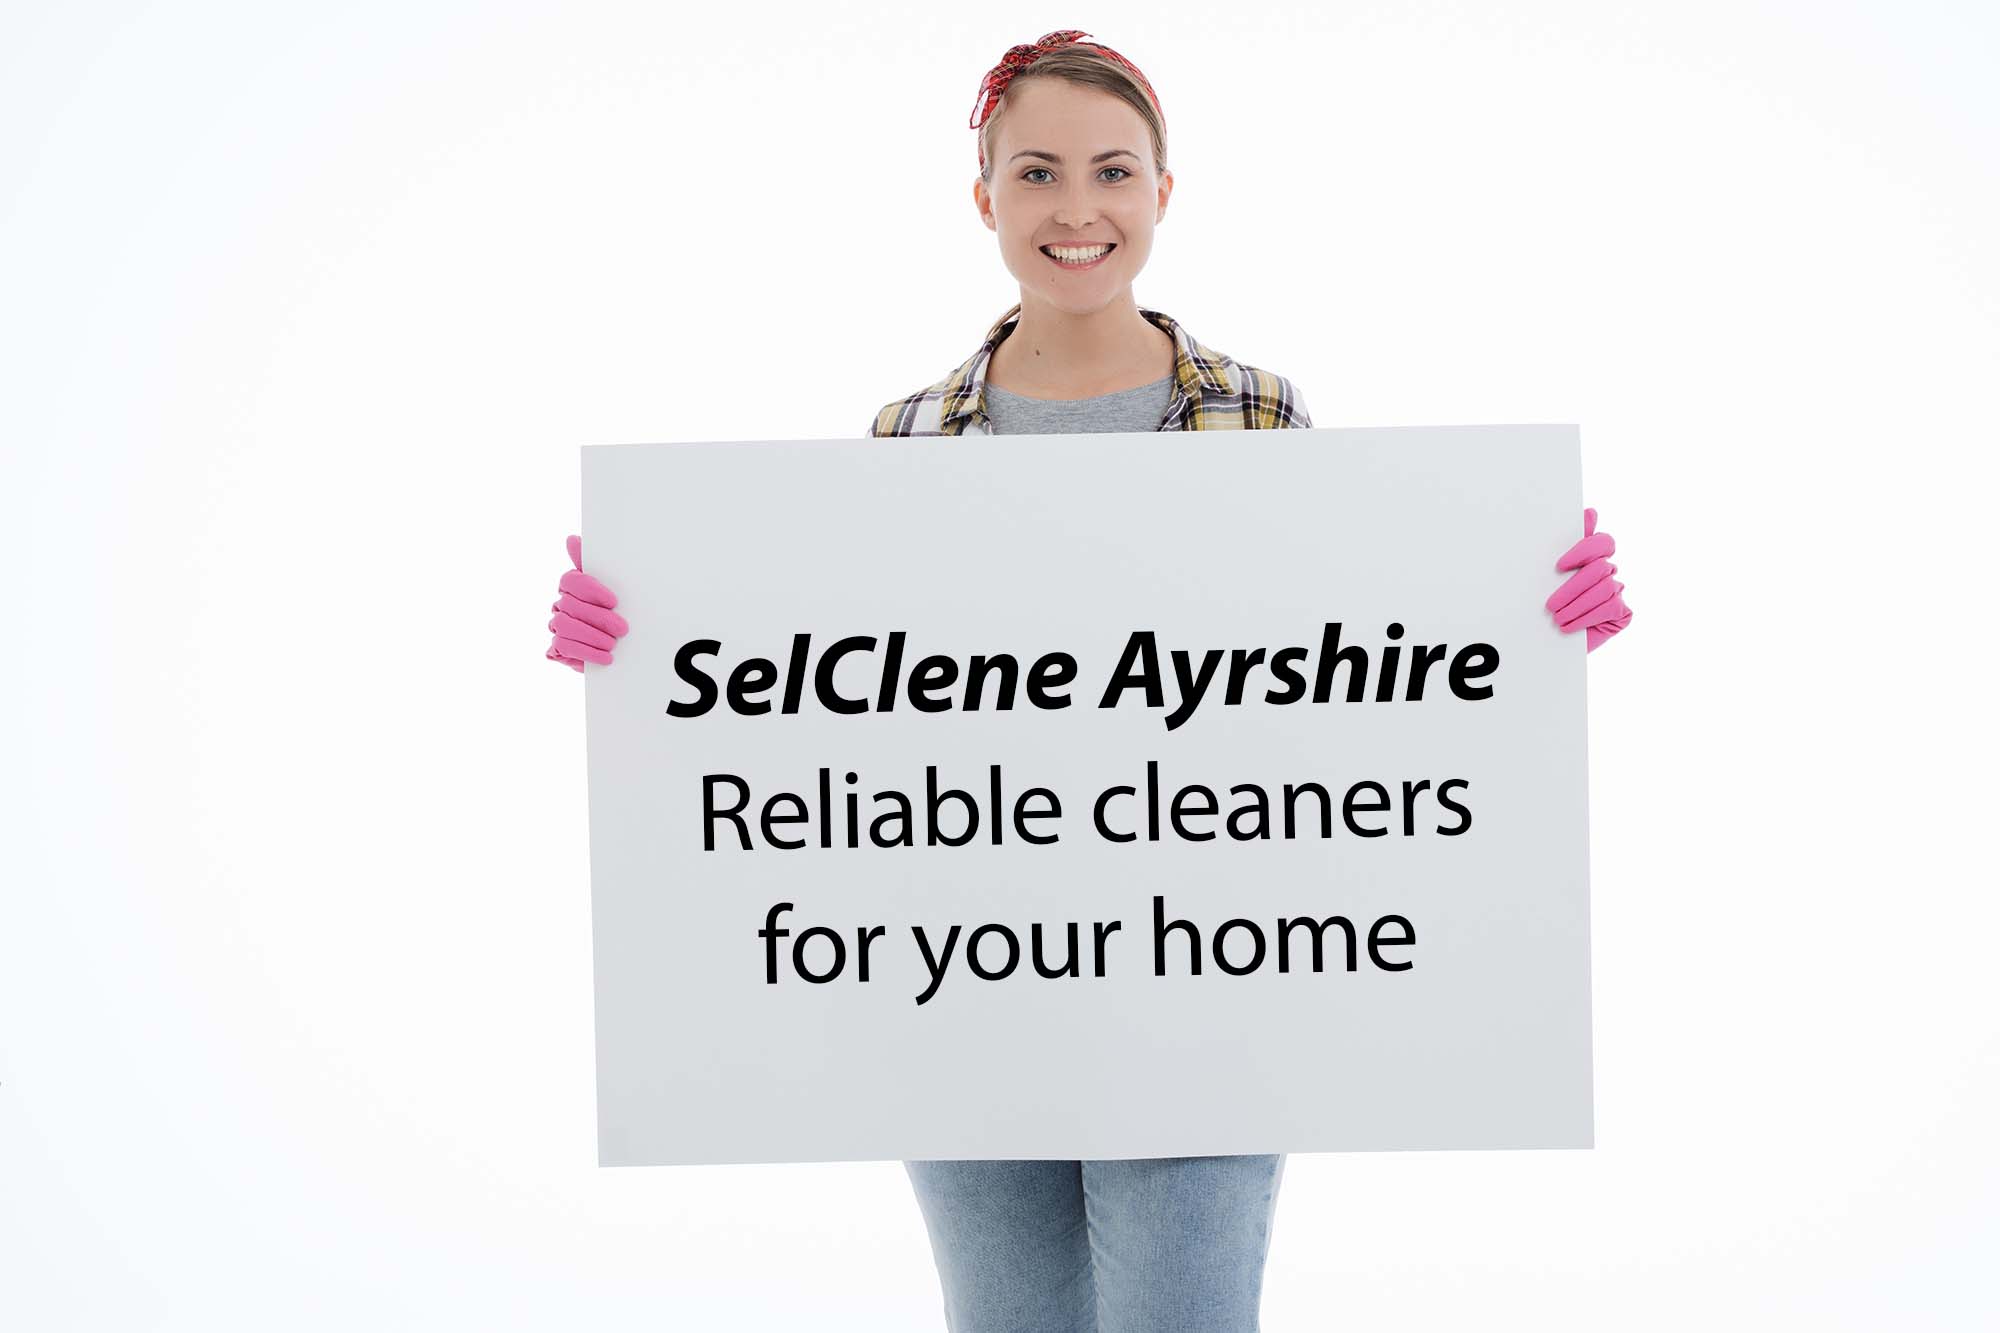 Image of a woman facing the camera dressed as a cleaner and holding us a notice board promoting SelClene Ayrshire